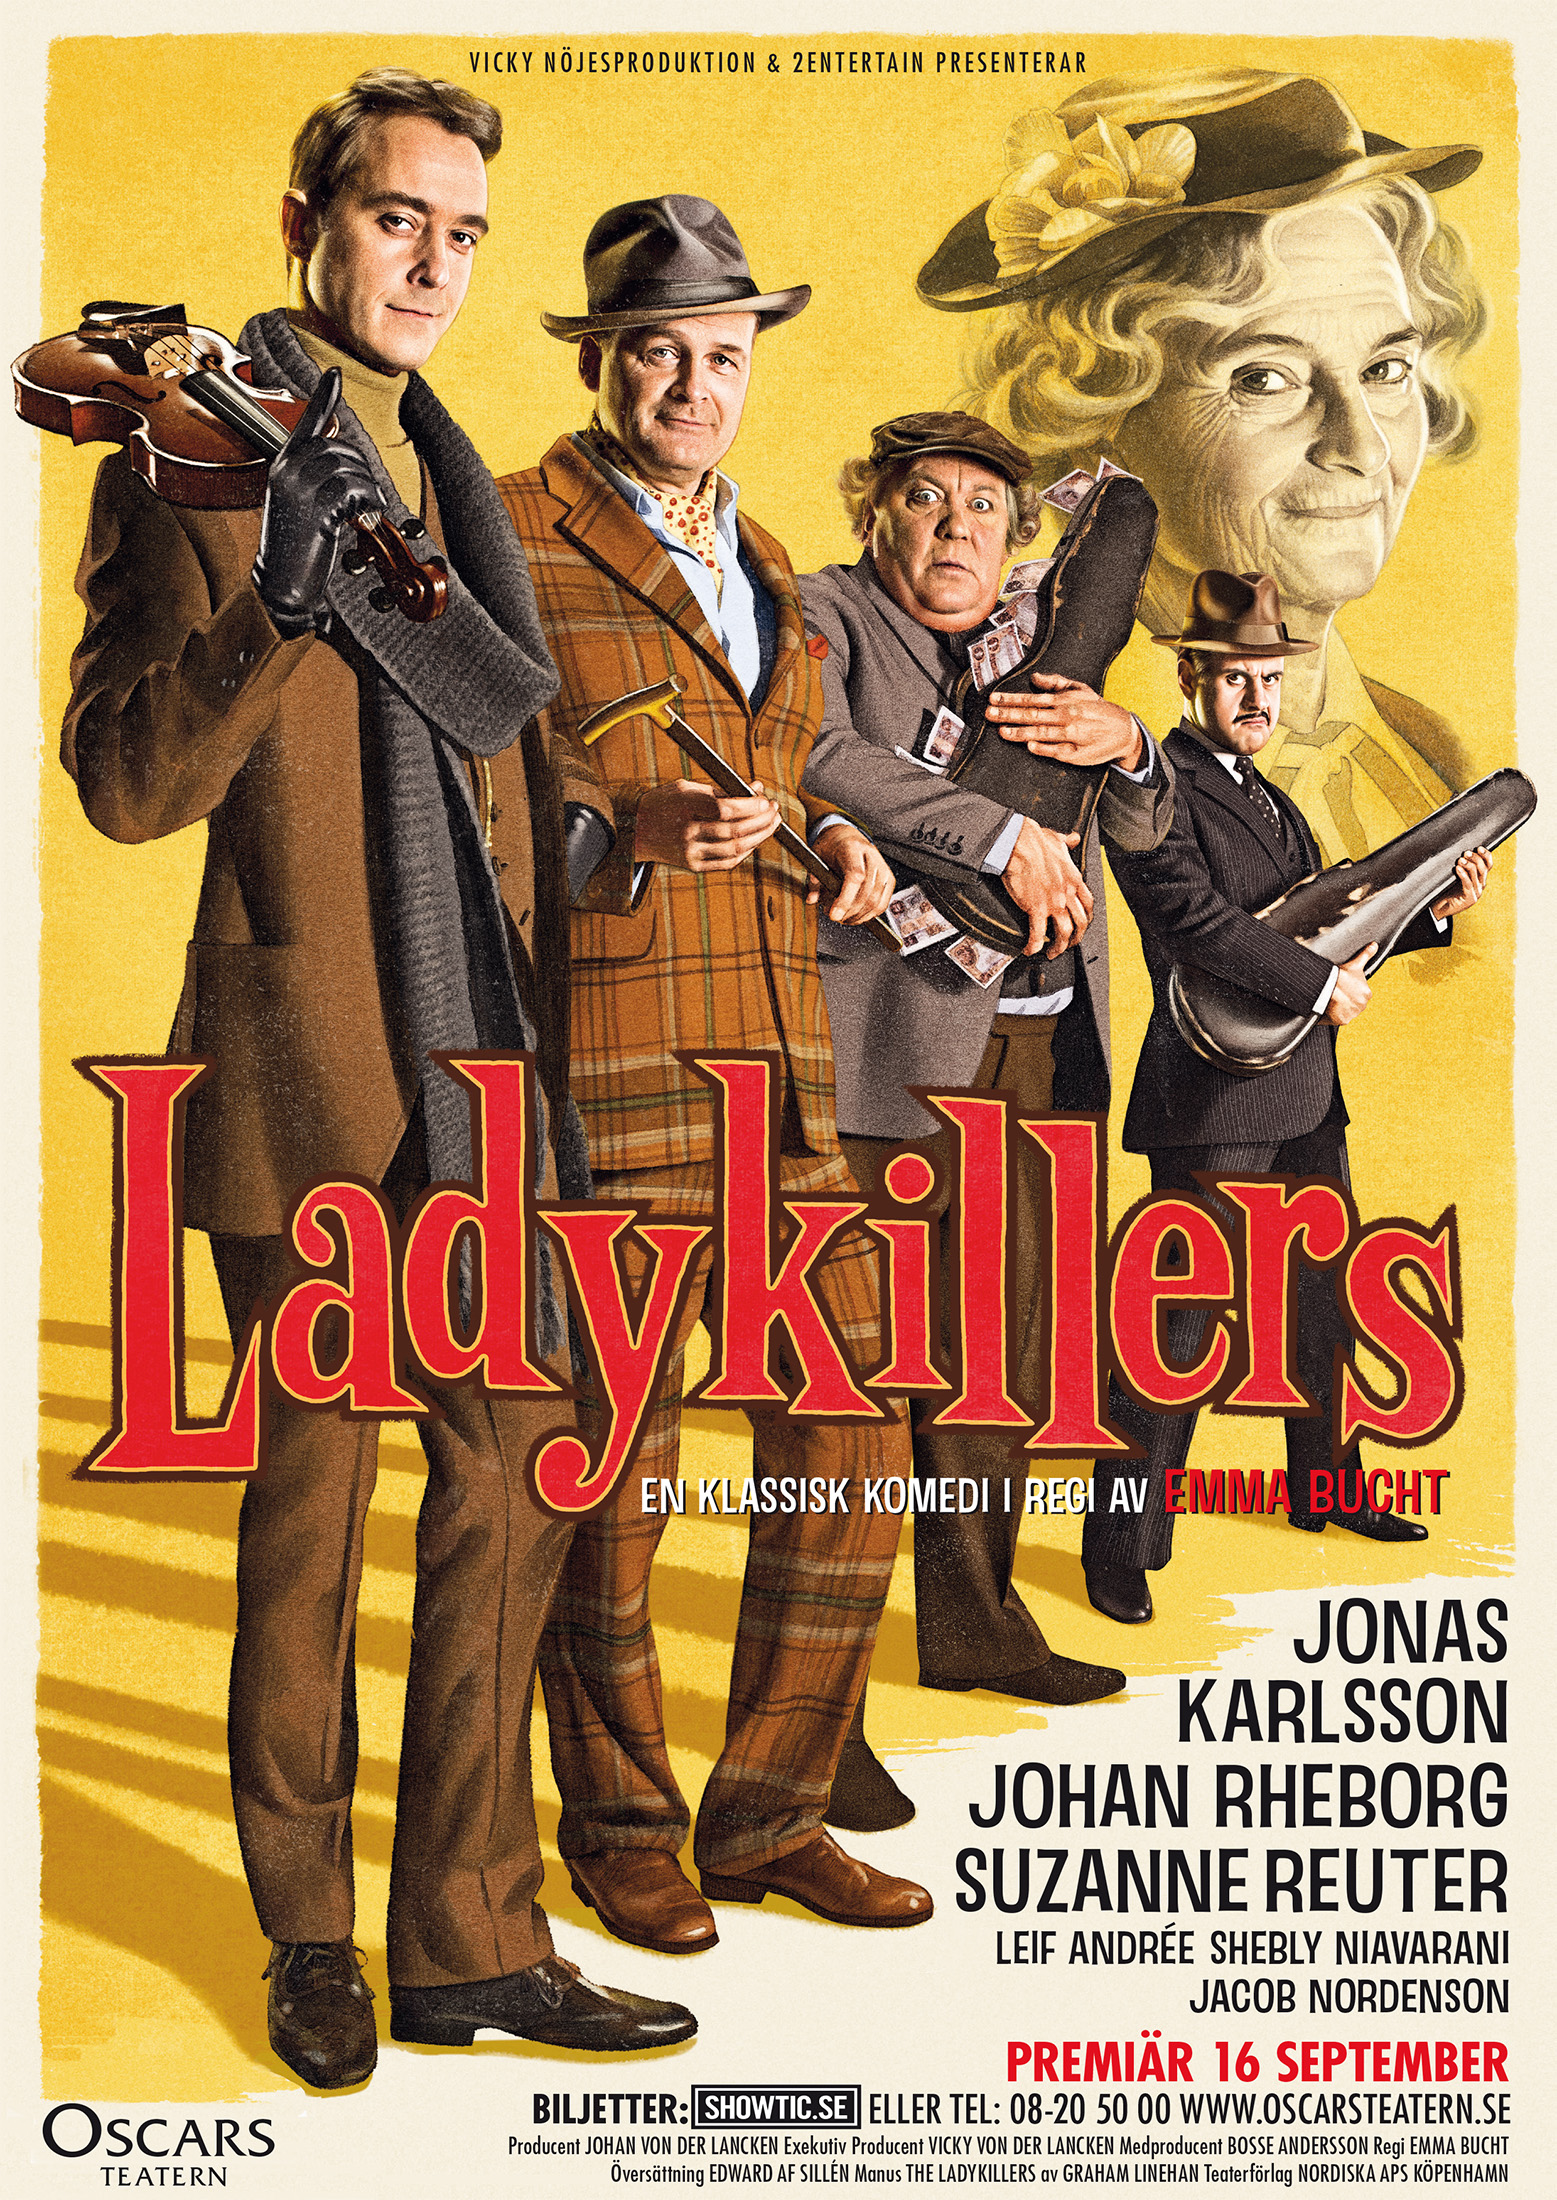 Ladykillers theatrical poster